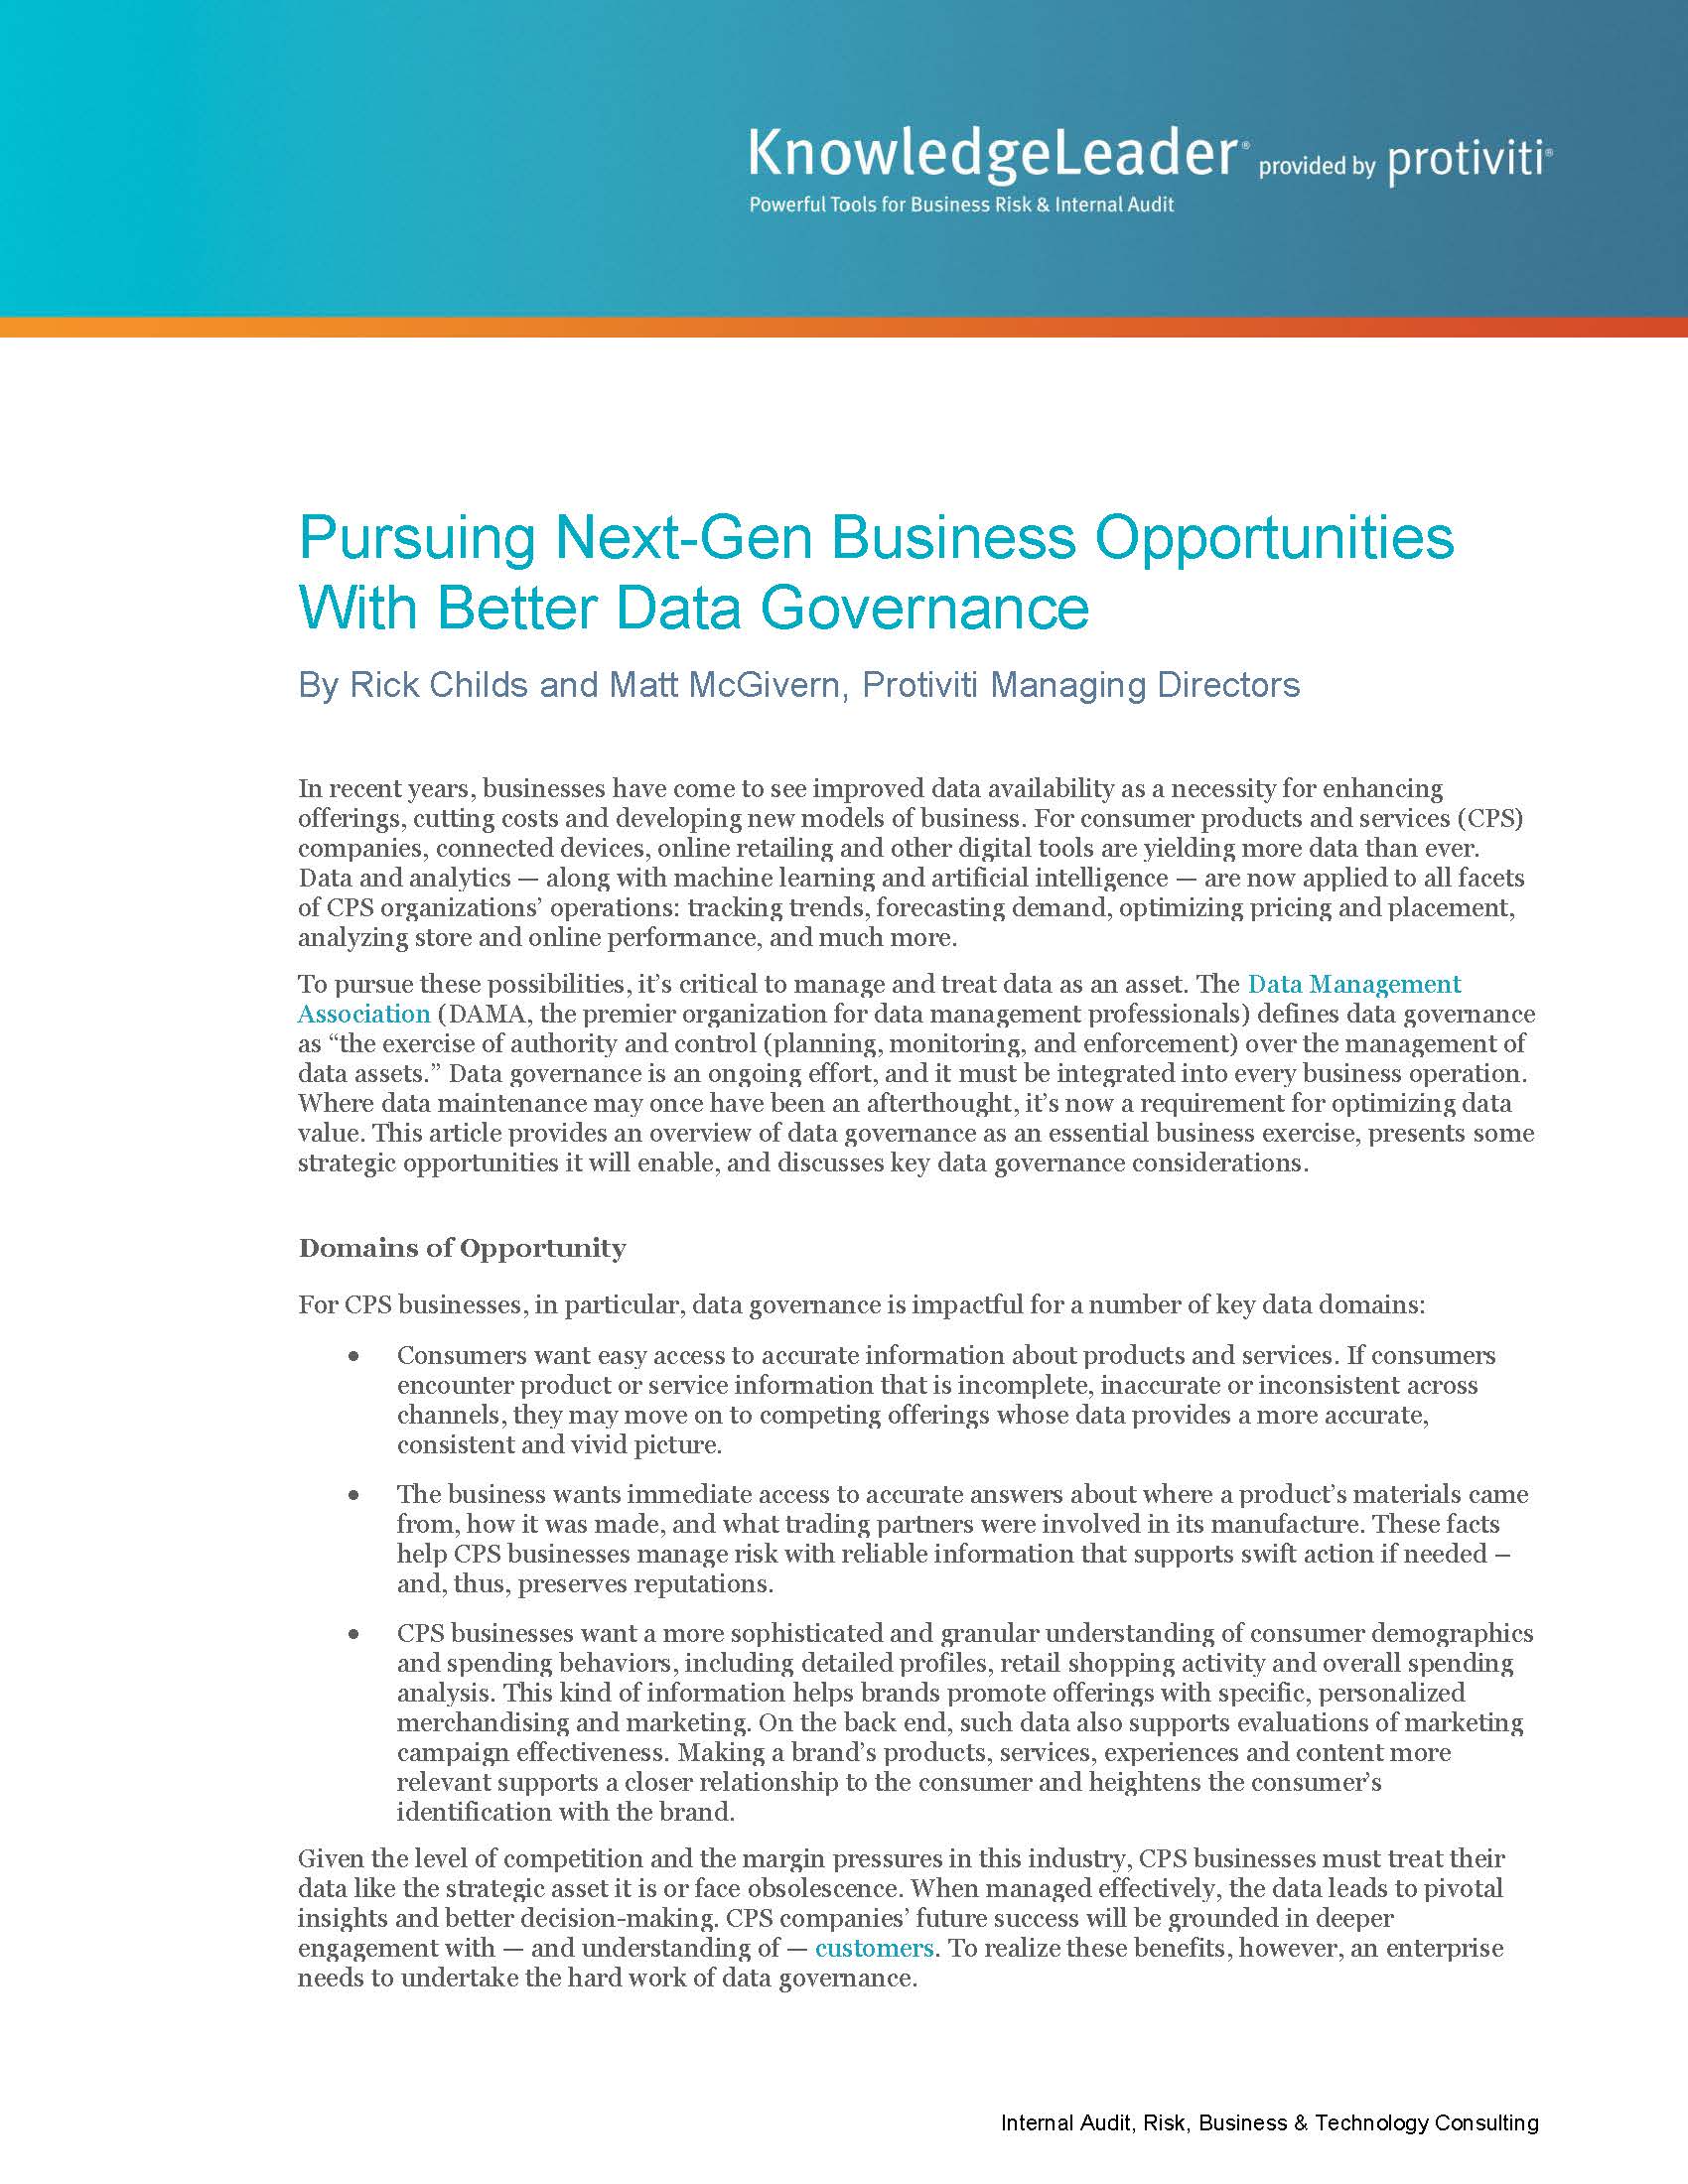 Screenshot of the first page of Pursuing Next-Gen Business Opportunities With Better Data Governance.